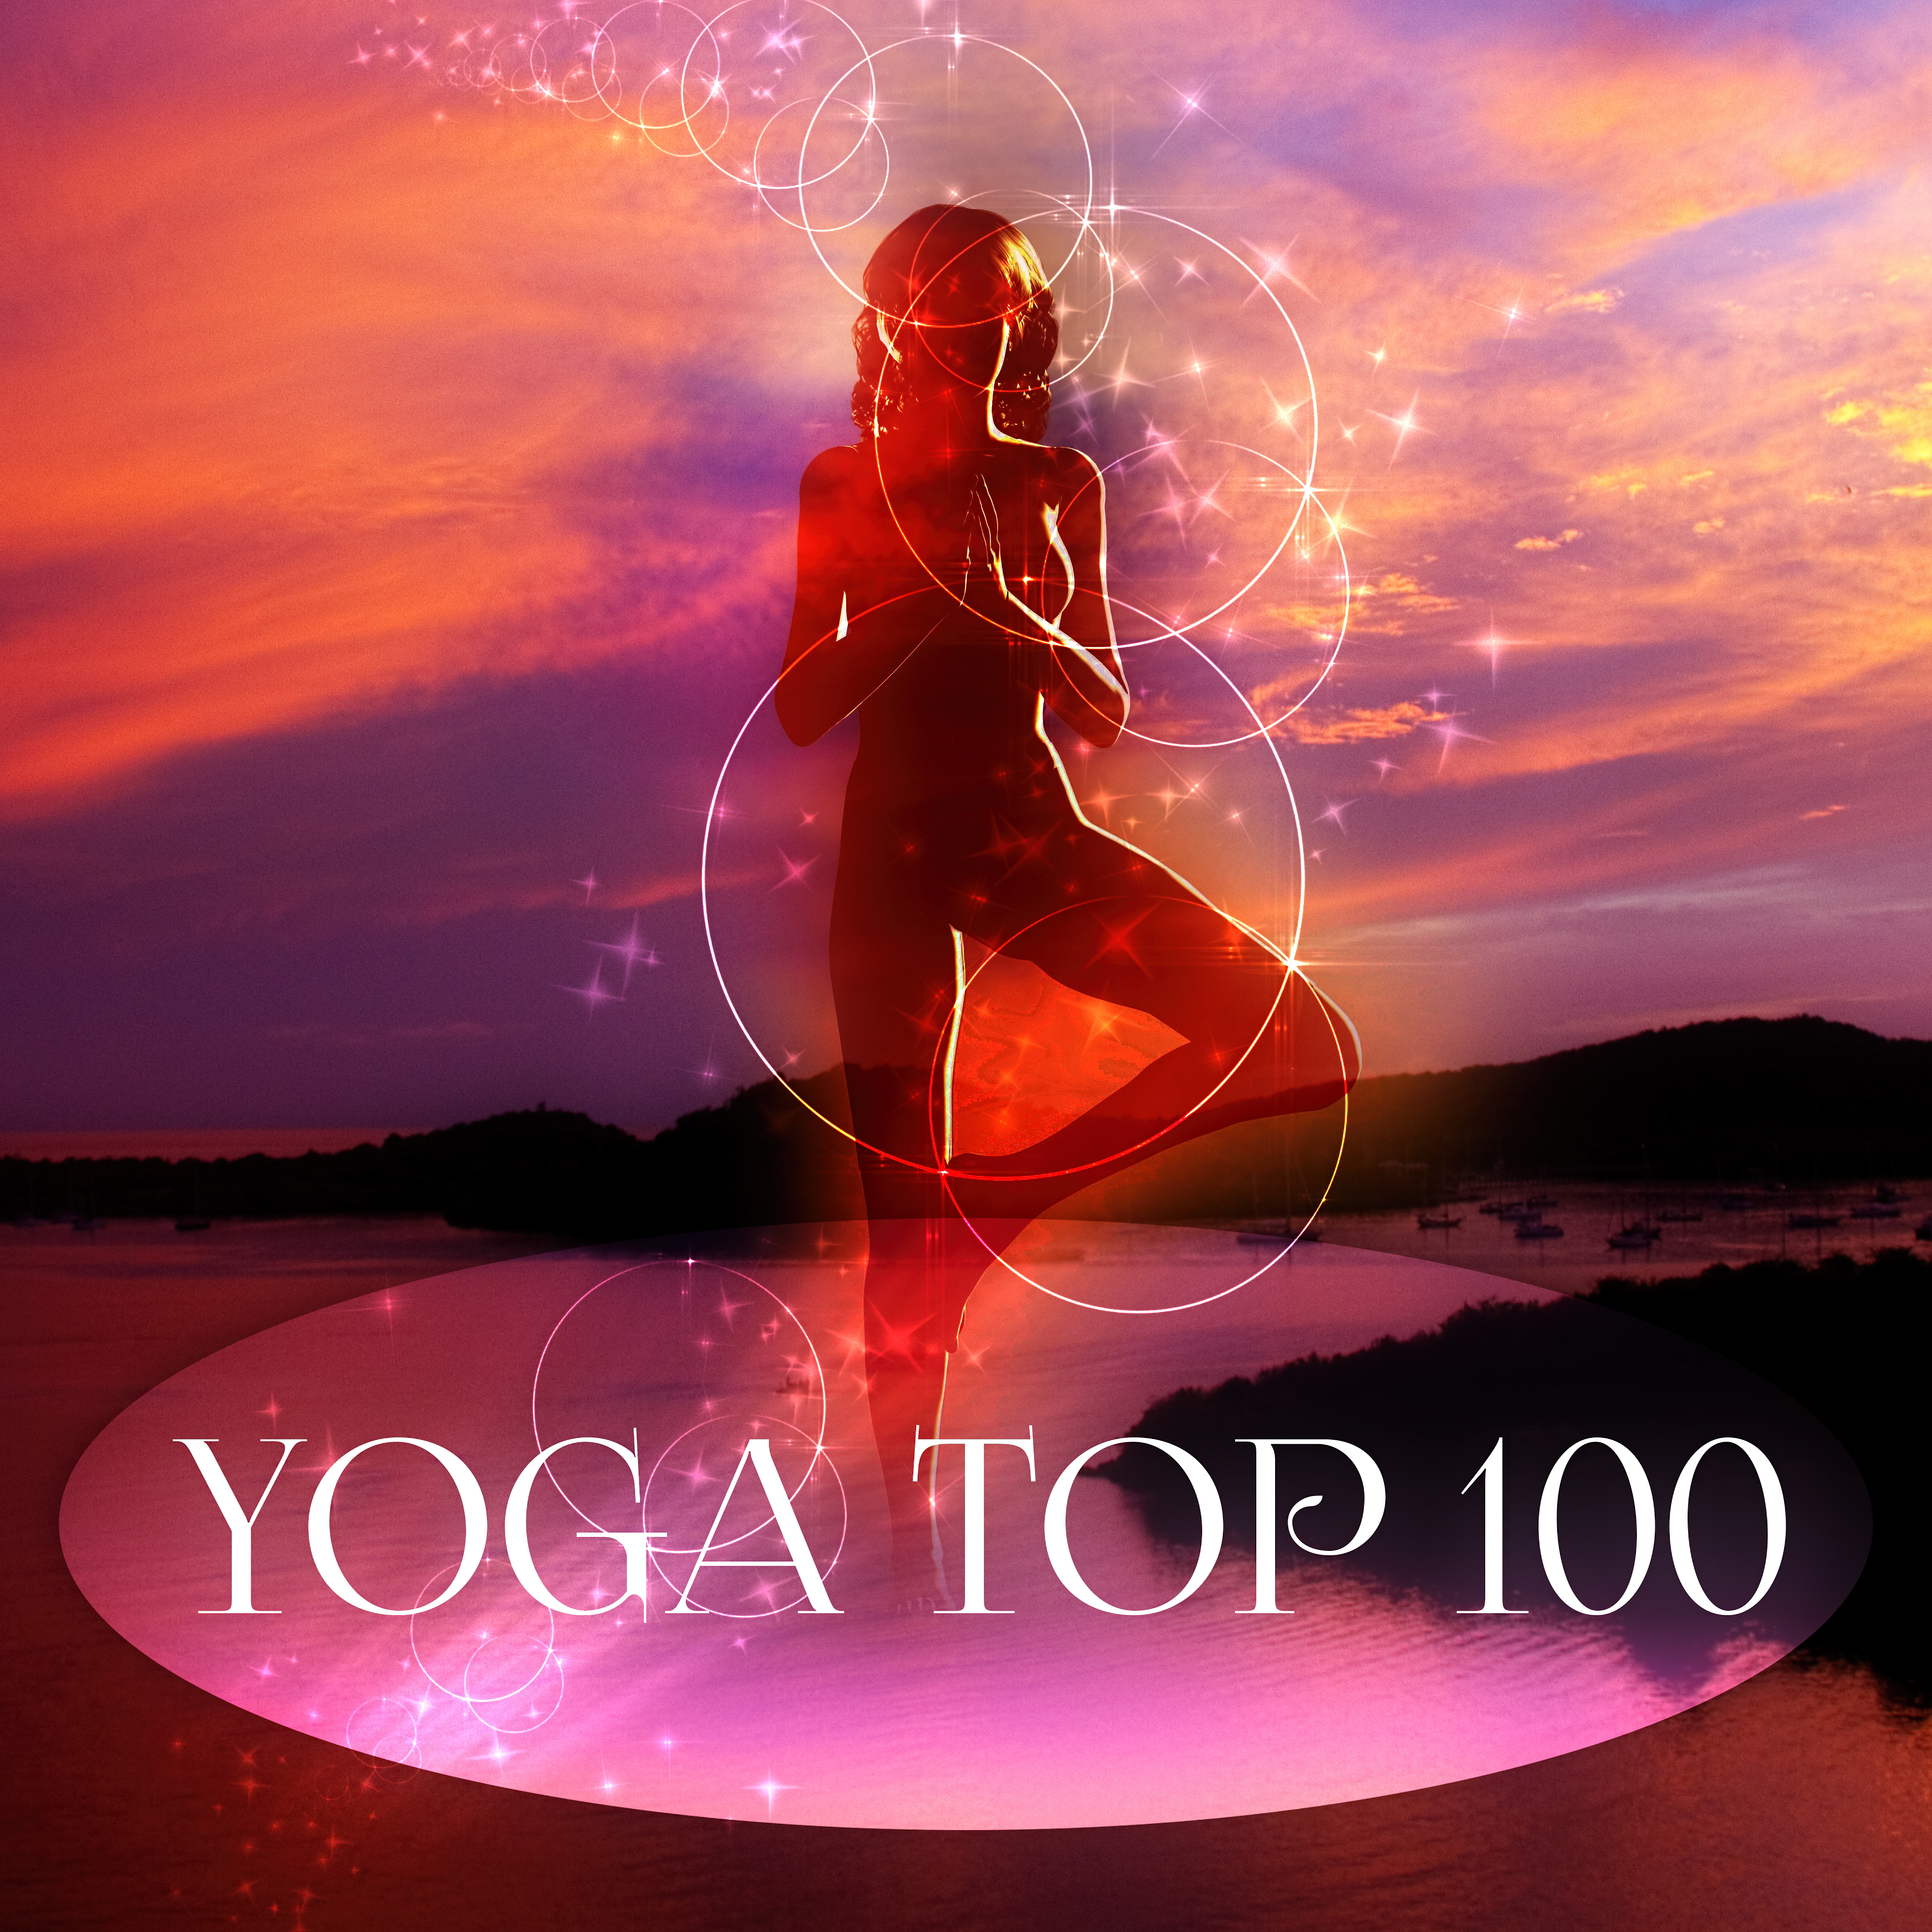 Yoga TOP 100  Meditation and Relaxation Music for Yoga Class, Relax Your Mind, Guided Mindfulness Meditation, Relaxing Tracks, Namaste